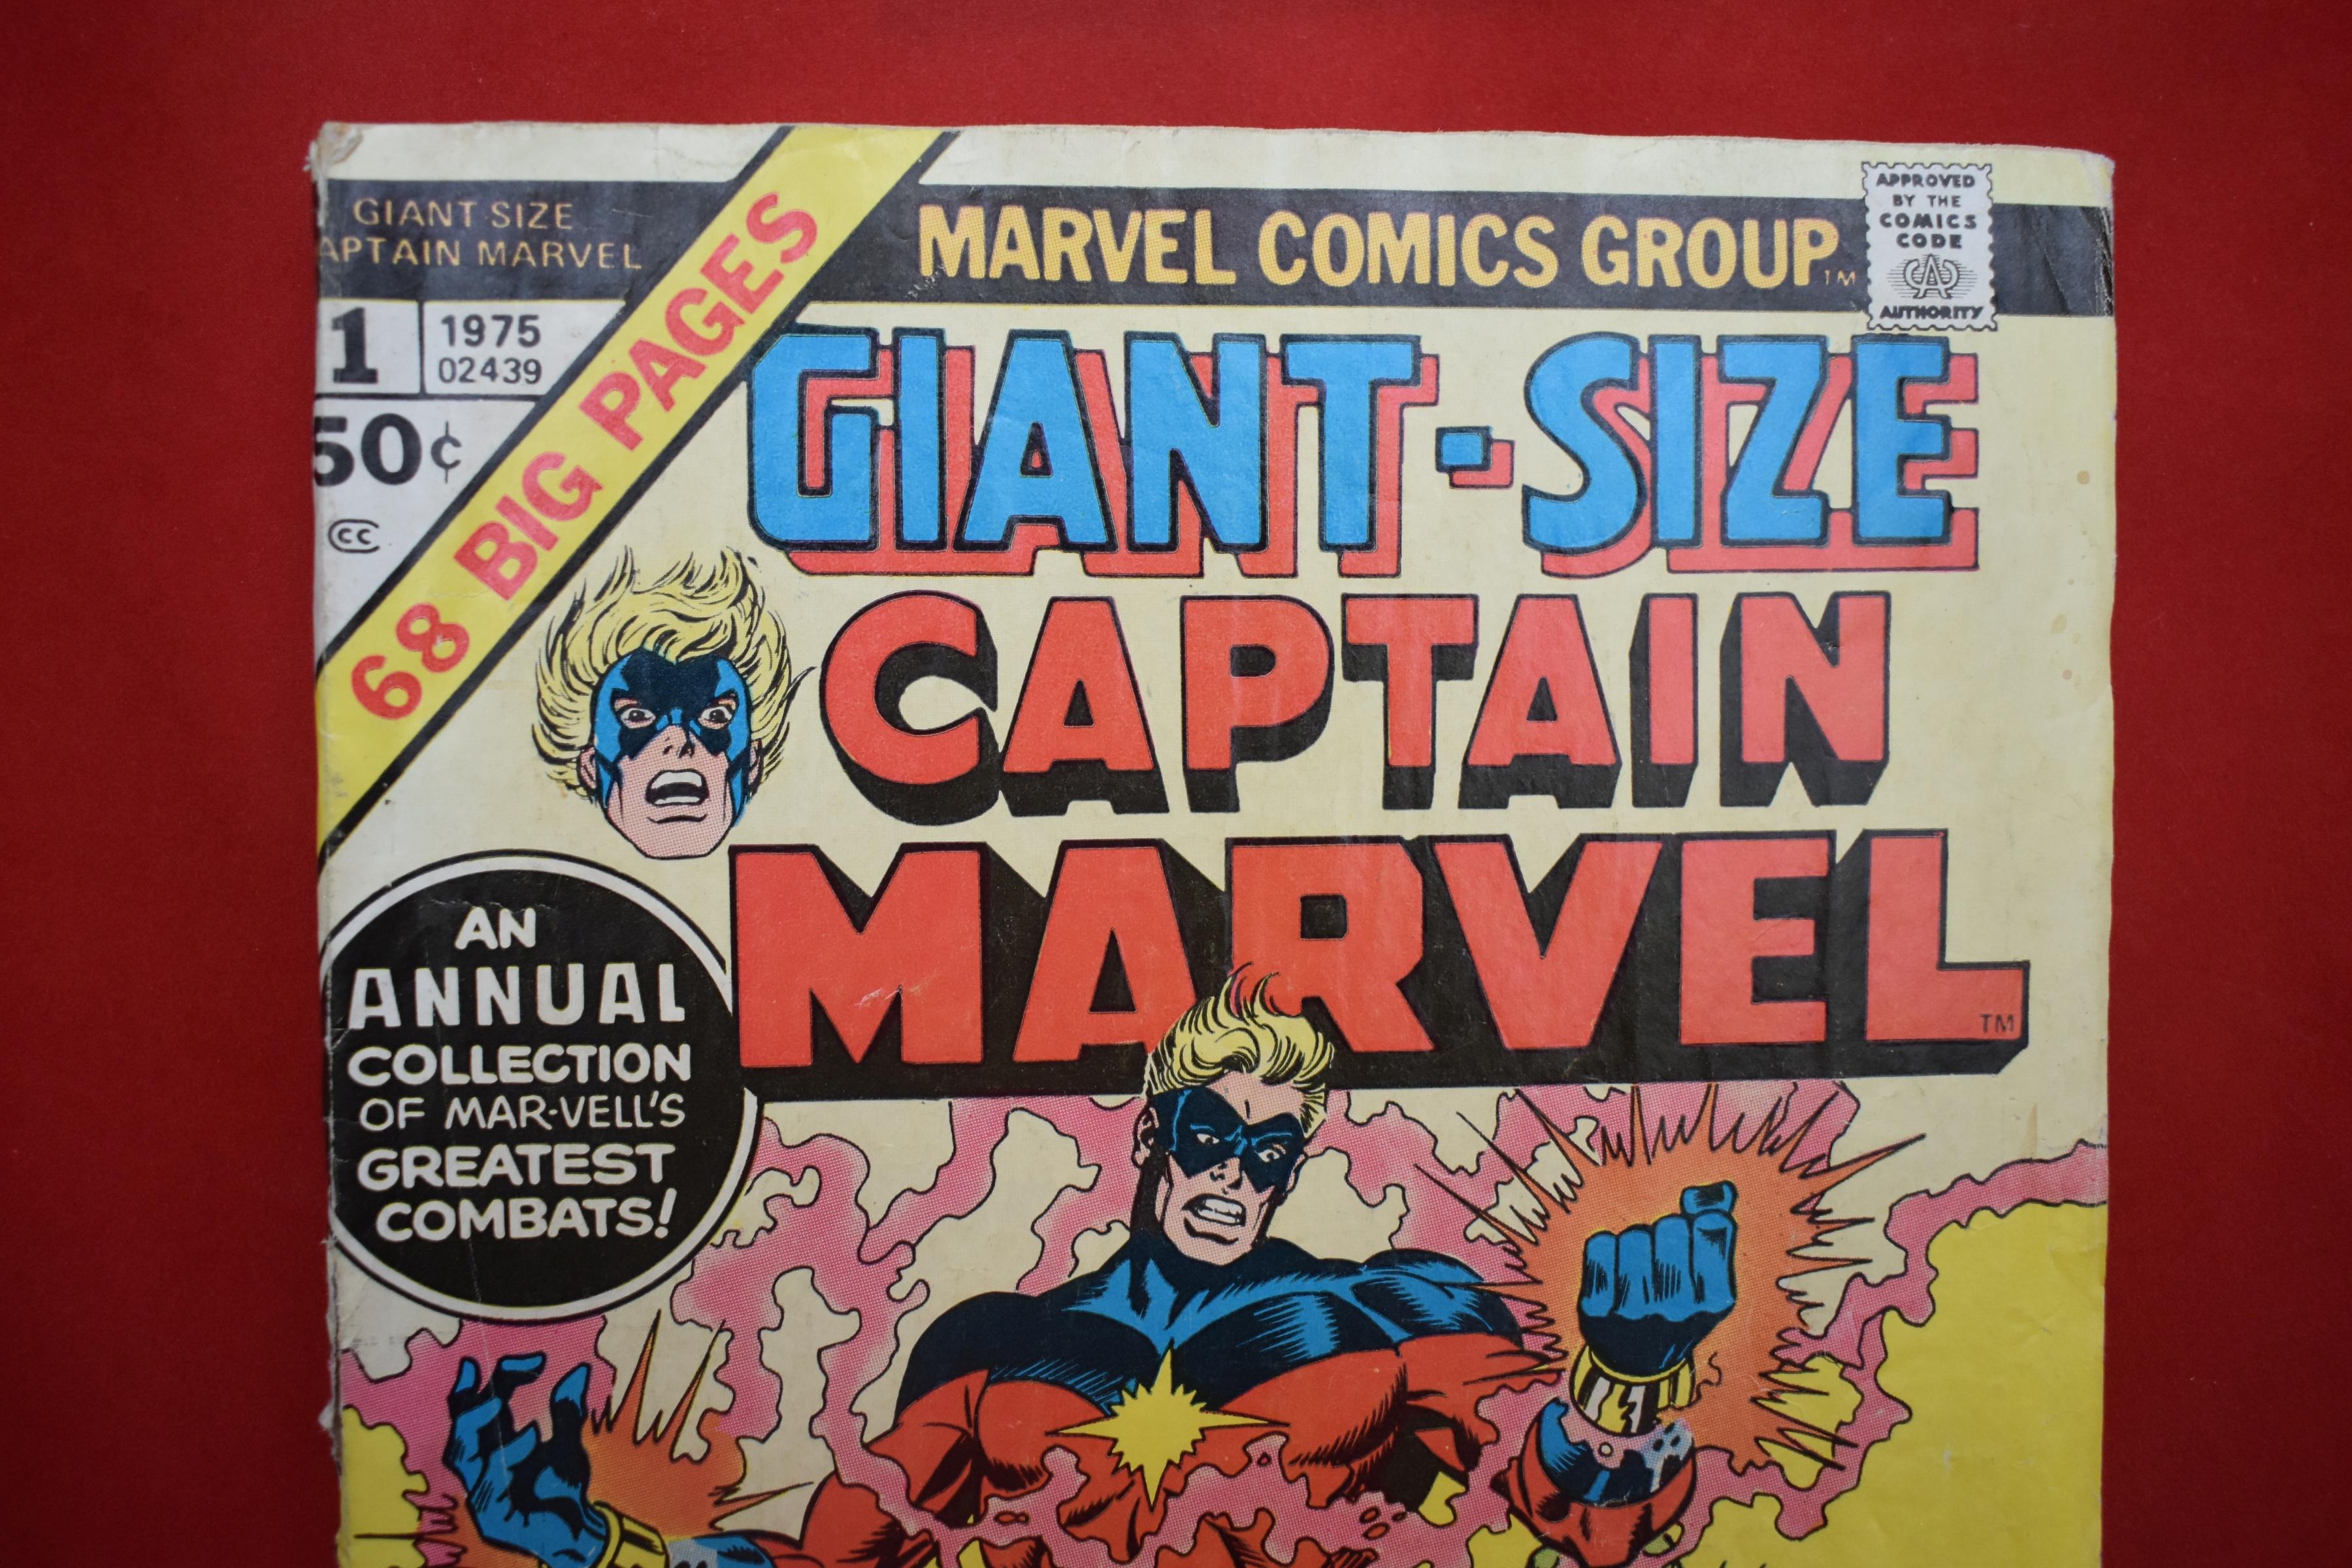 GIANT-SIZE CAPTAIN MARVEL #1 | HERE COMES THE HULK! | *COVER/SPINE WEAR - ATTACHED - SEE PICS*